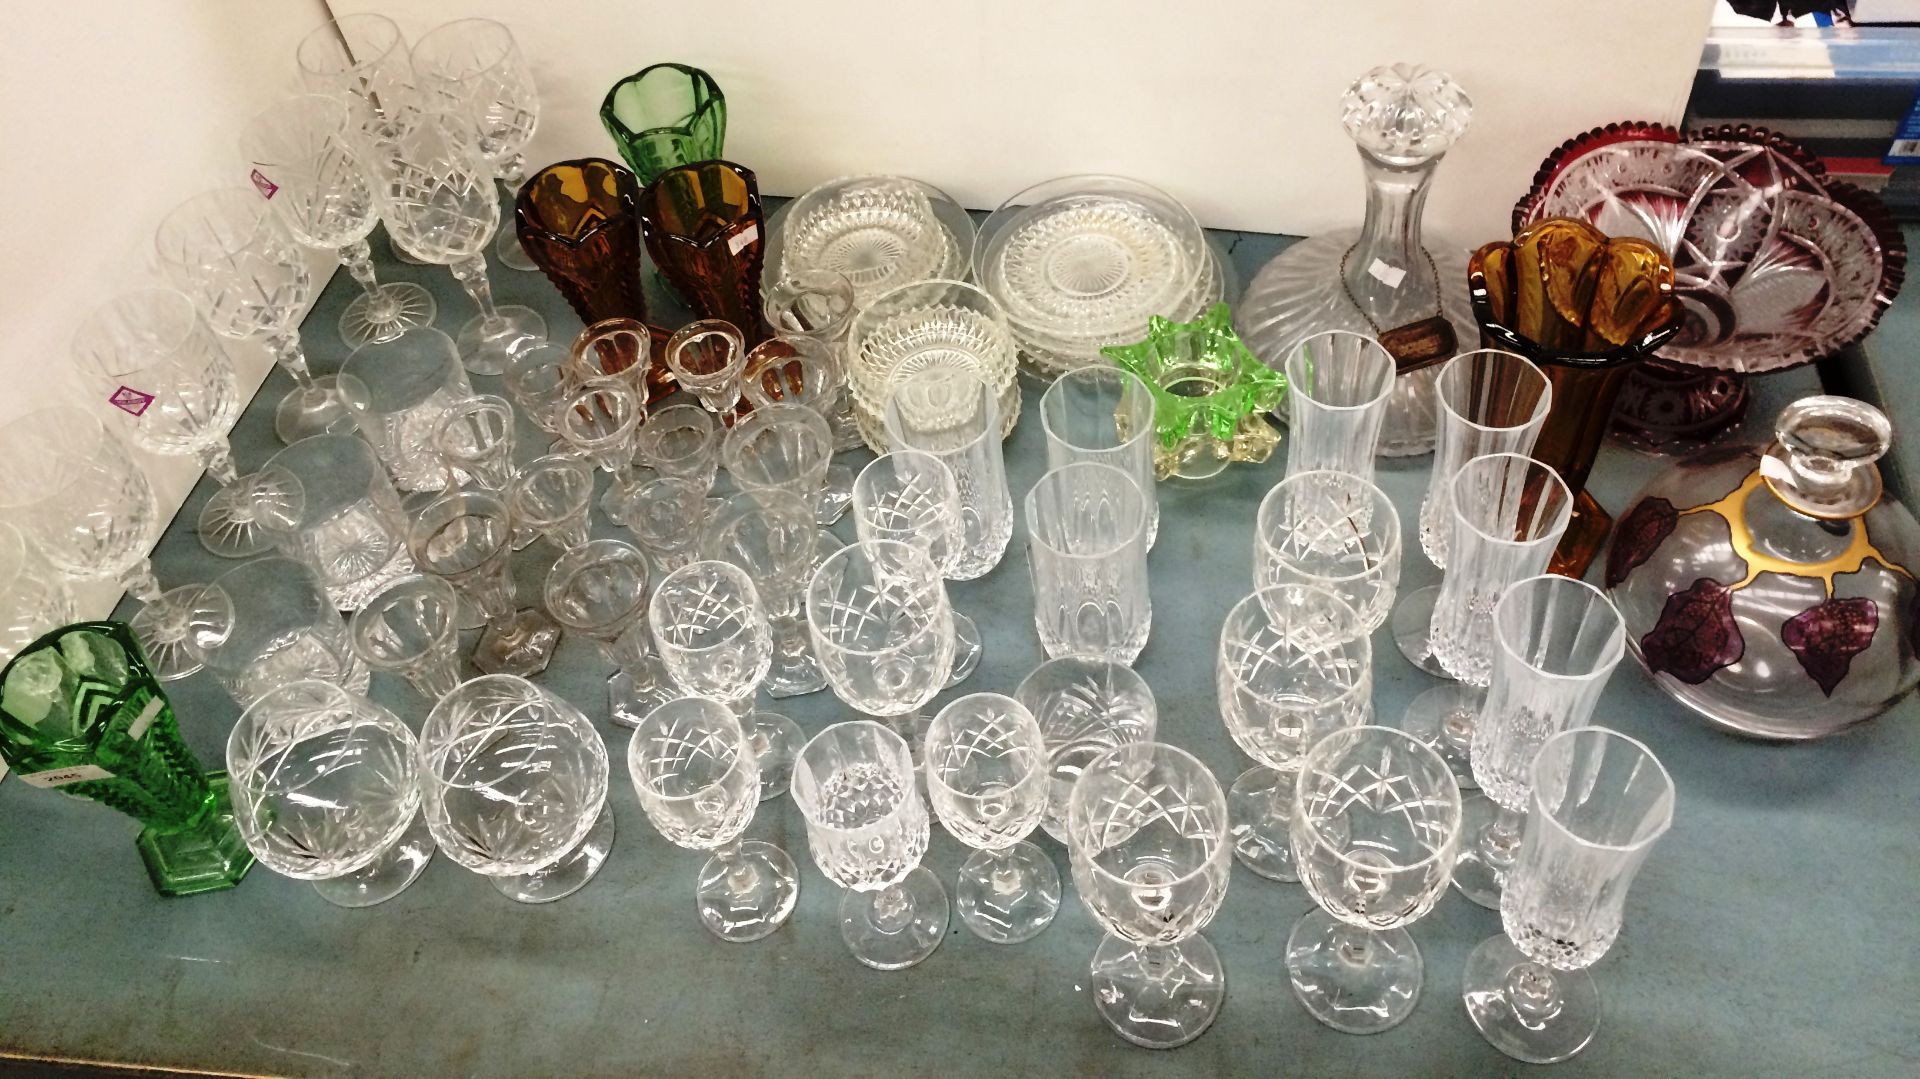 Contents to part table top - assorted glassware including a mushroom shaped decanter with Scotch